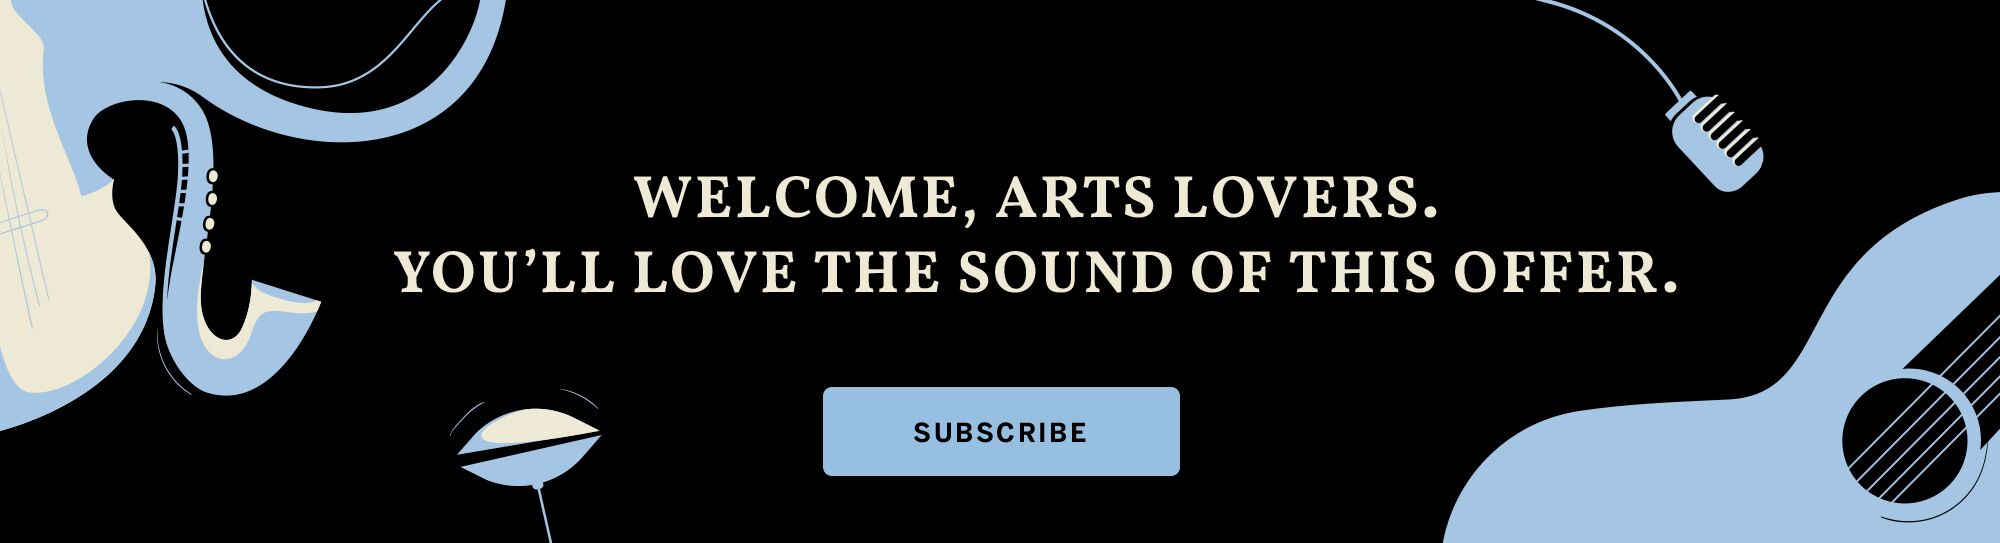 Arts and Culture featured banner